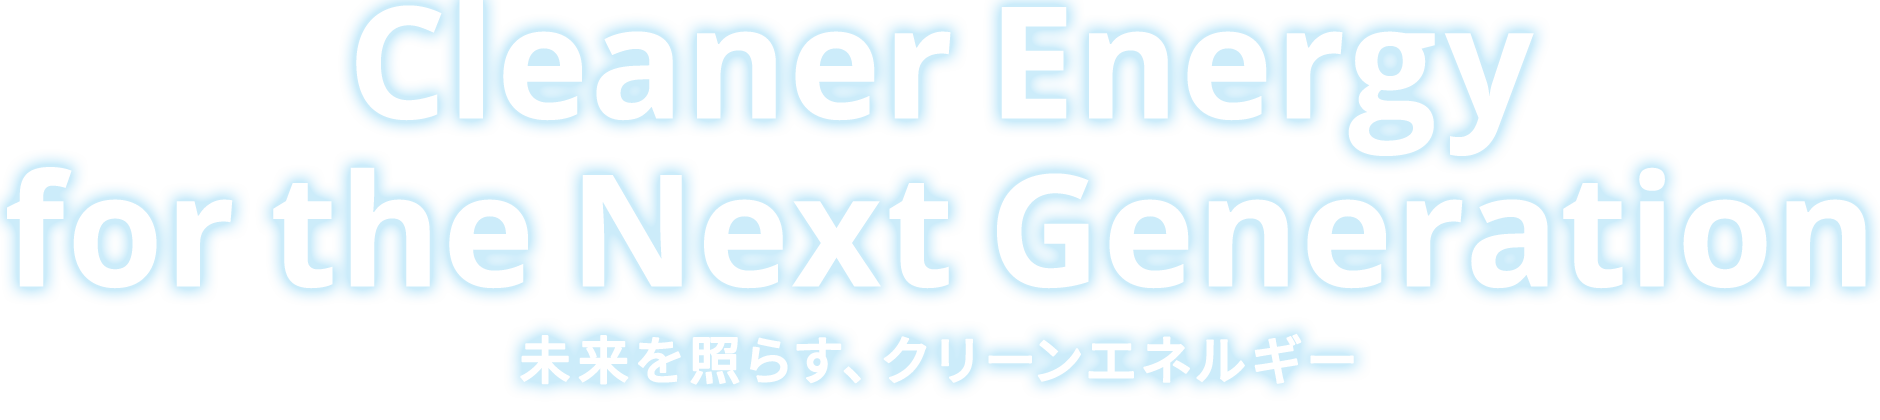 Cleaner Energy for the Next Generation 未来を照らす、クリーンエネルギー